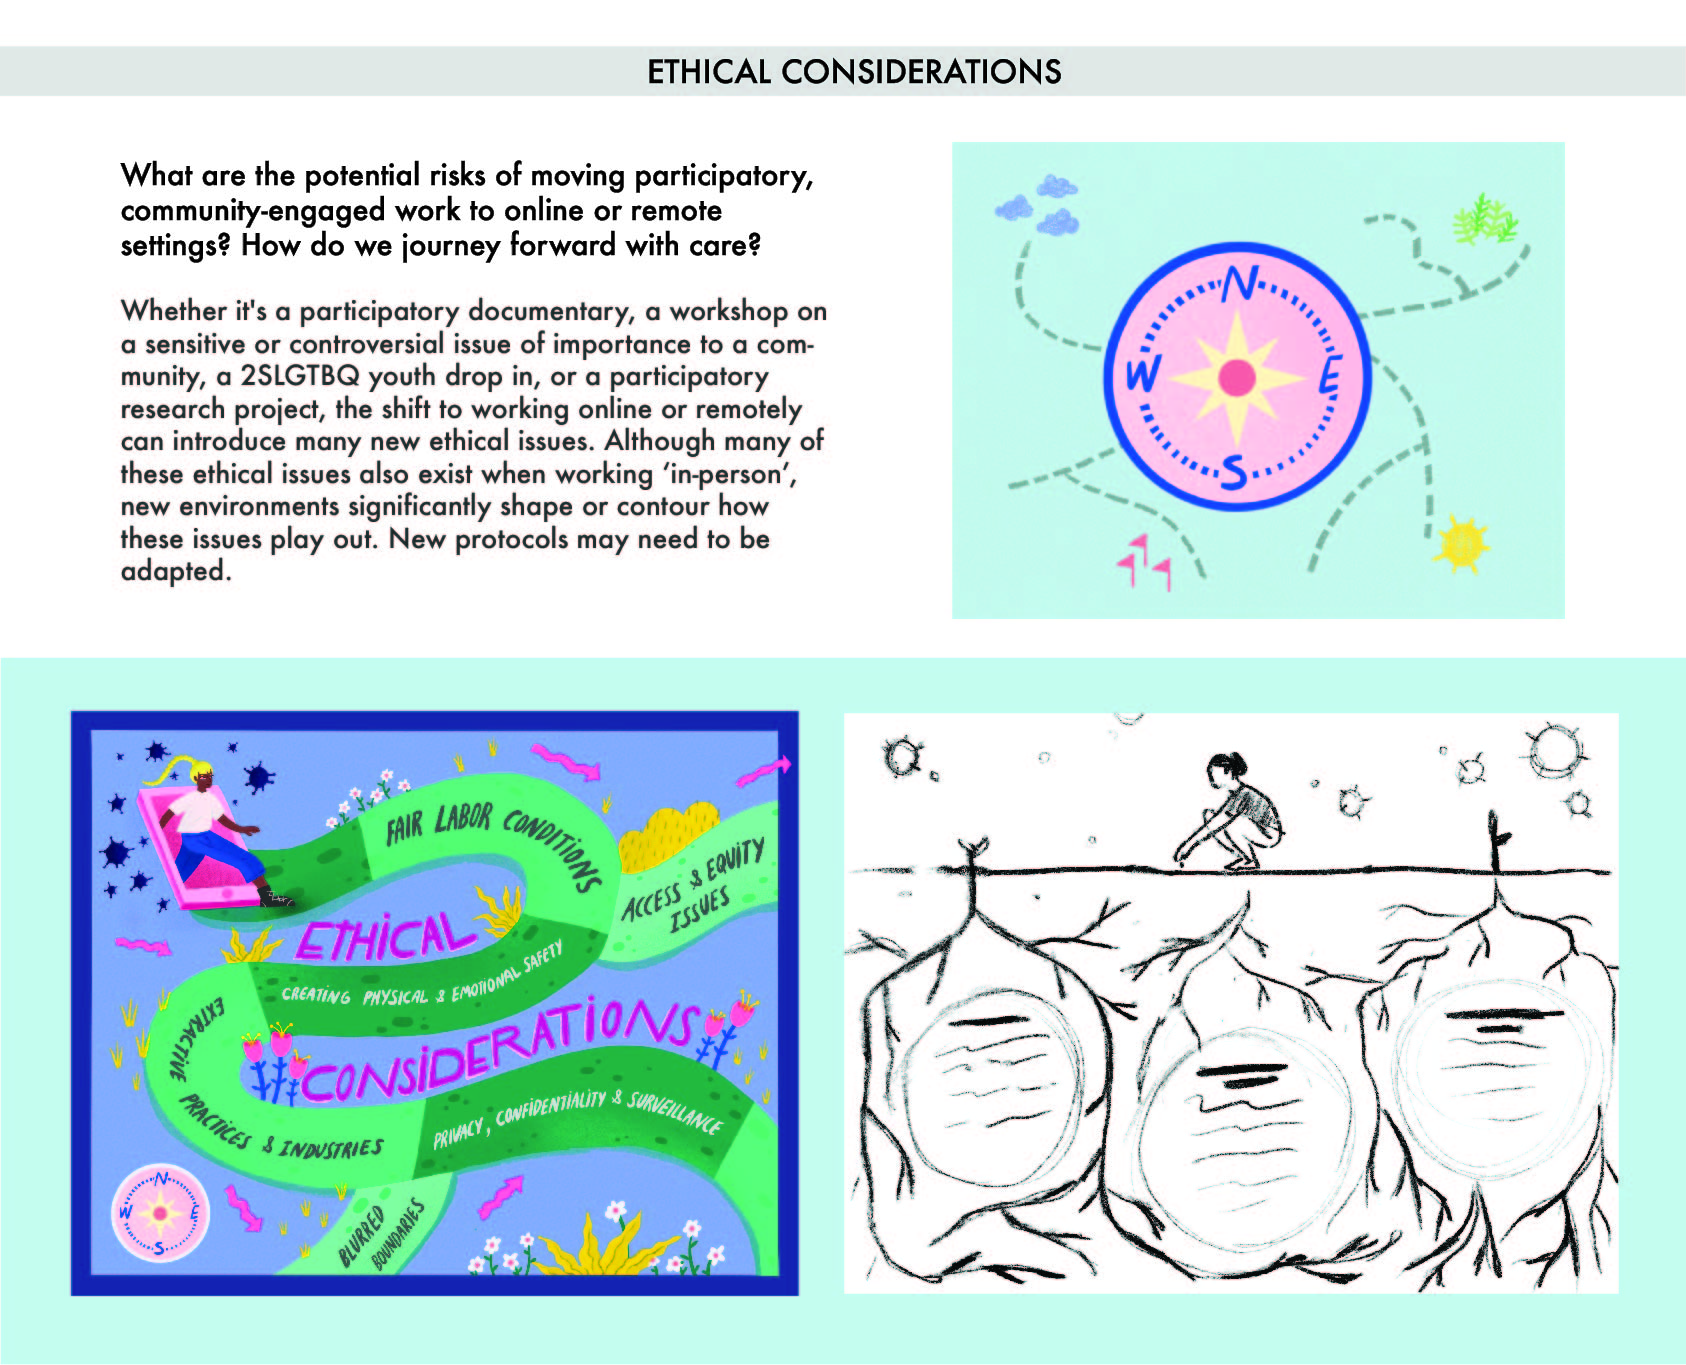 Composite image of draft and final illustrations relating to ethical considerations.